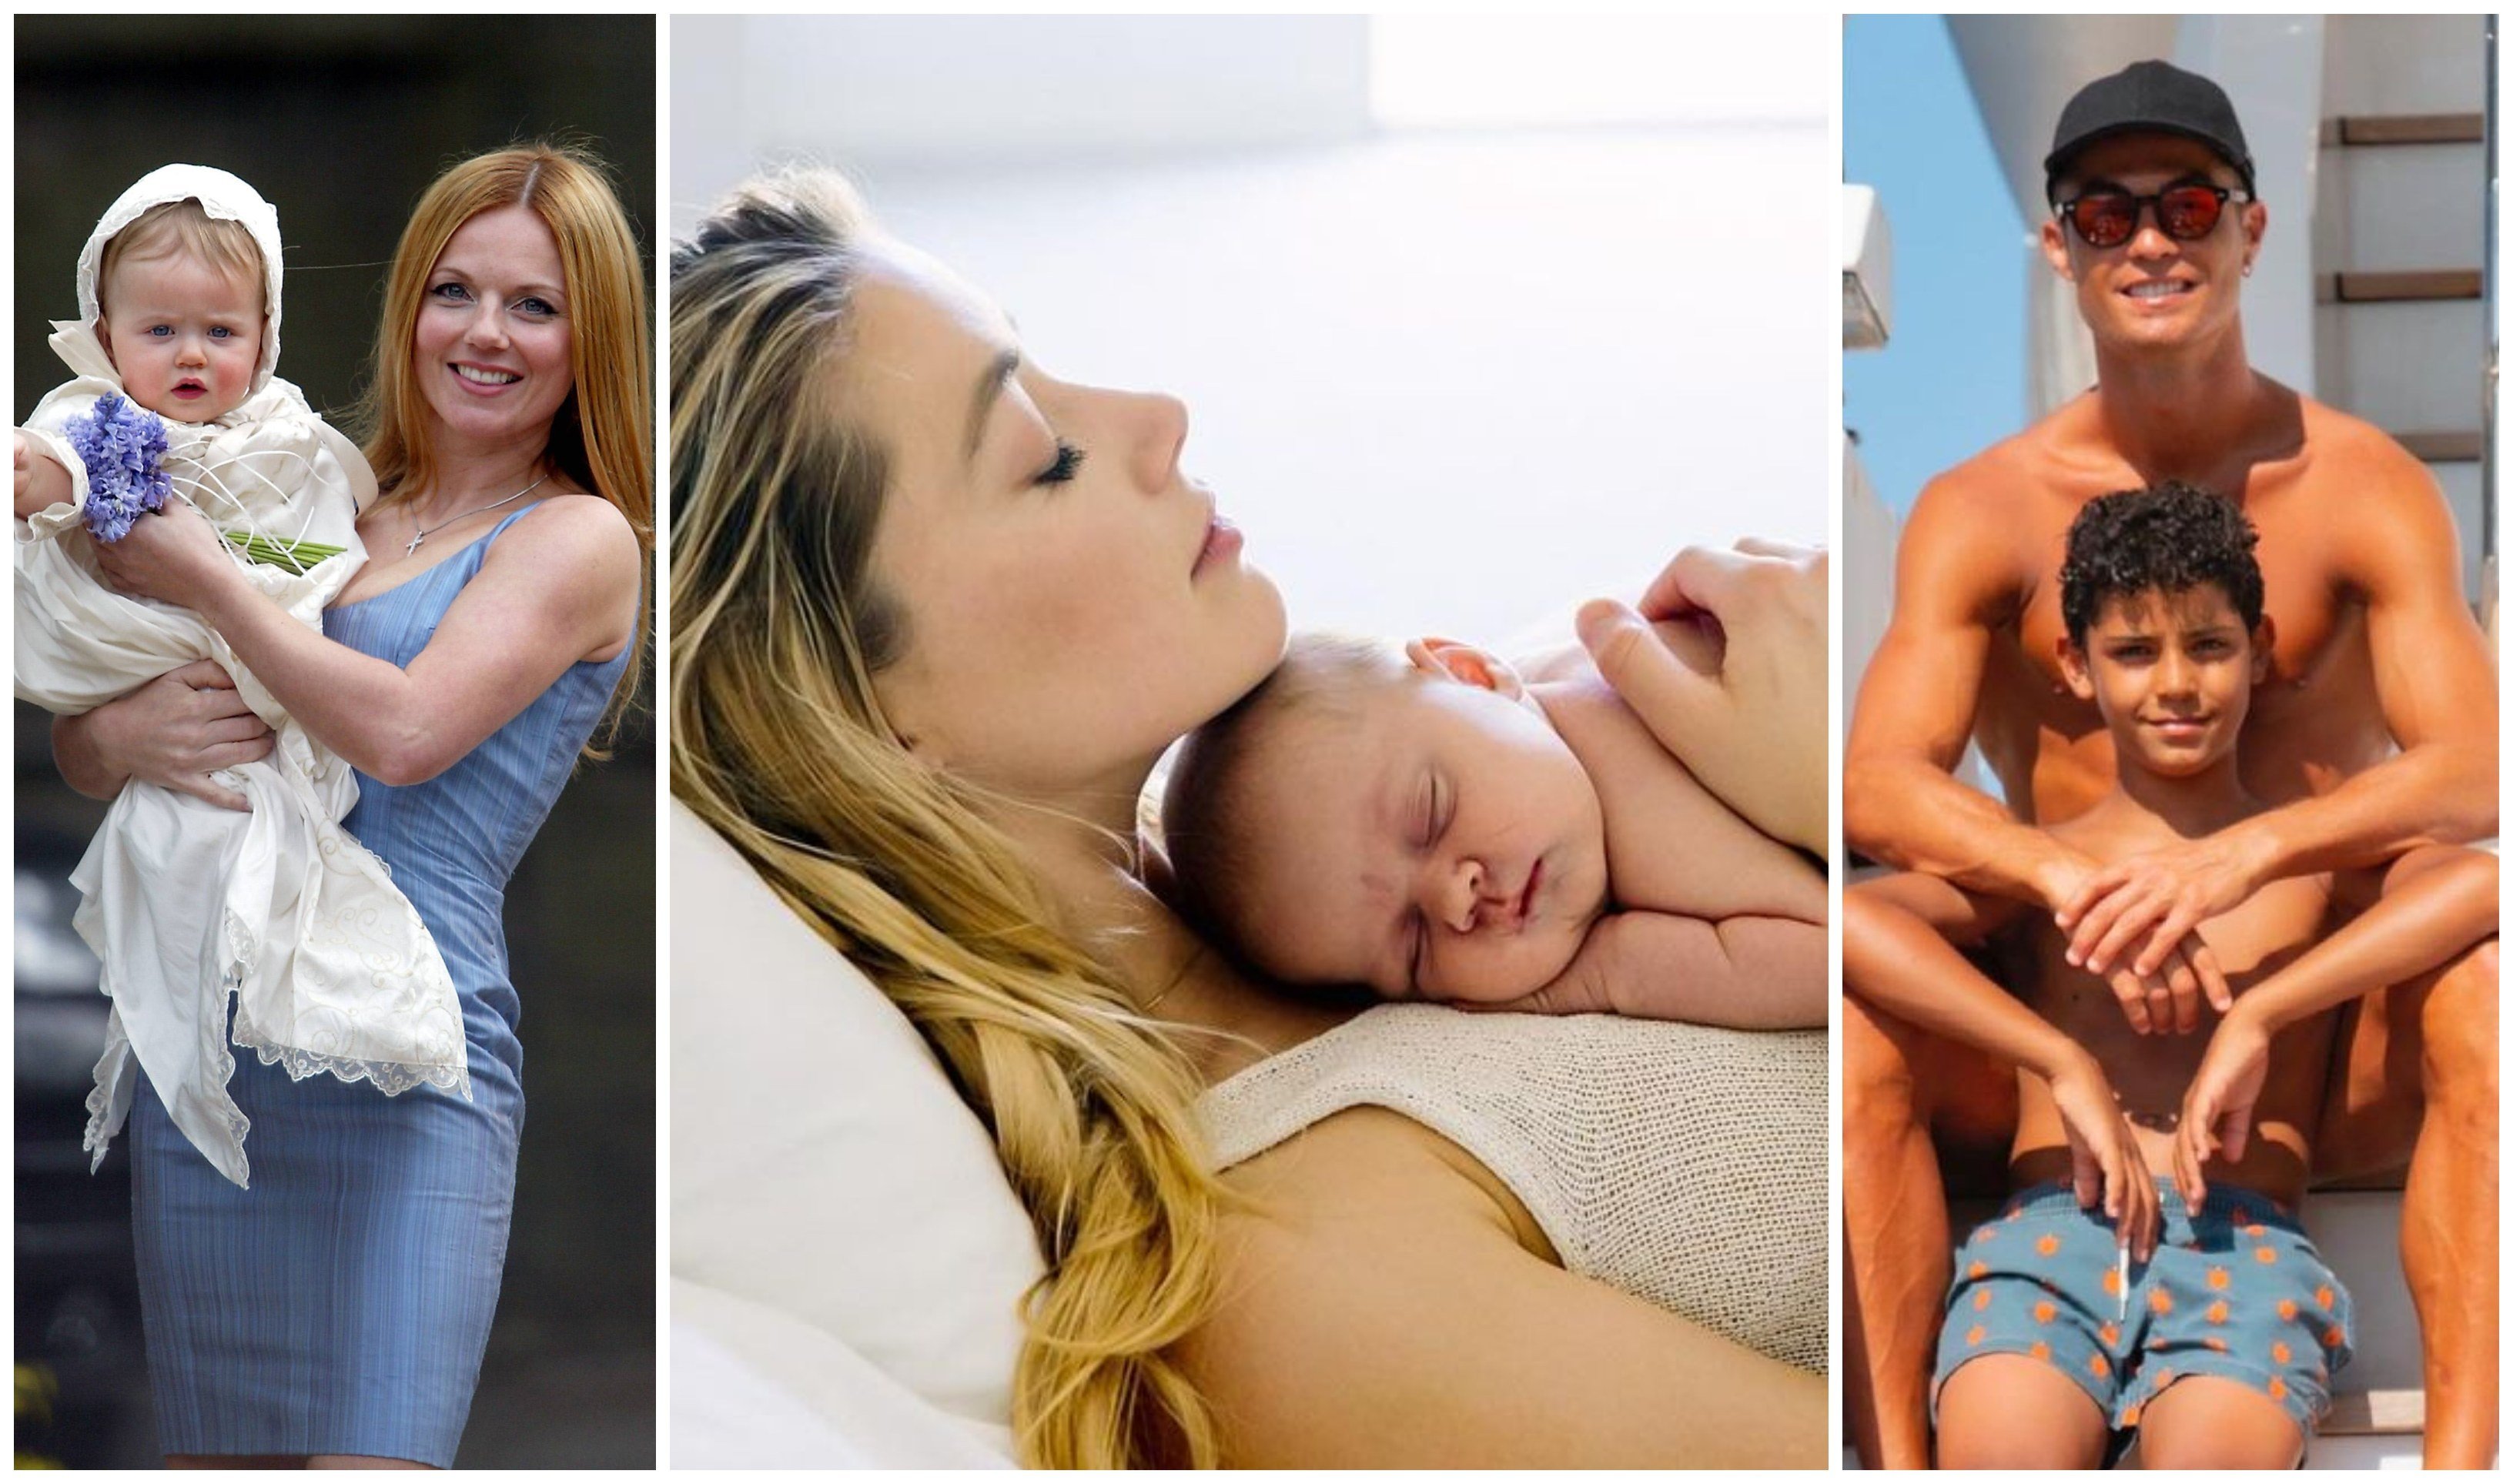 Geri Halliwell, Amber Heard and Cristiano Ronaldo all chose not to reveal their child’s parentage at one point. Photos: @amberheard, @cristiano/Instagram; Agency